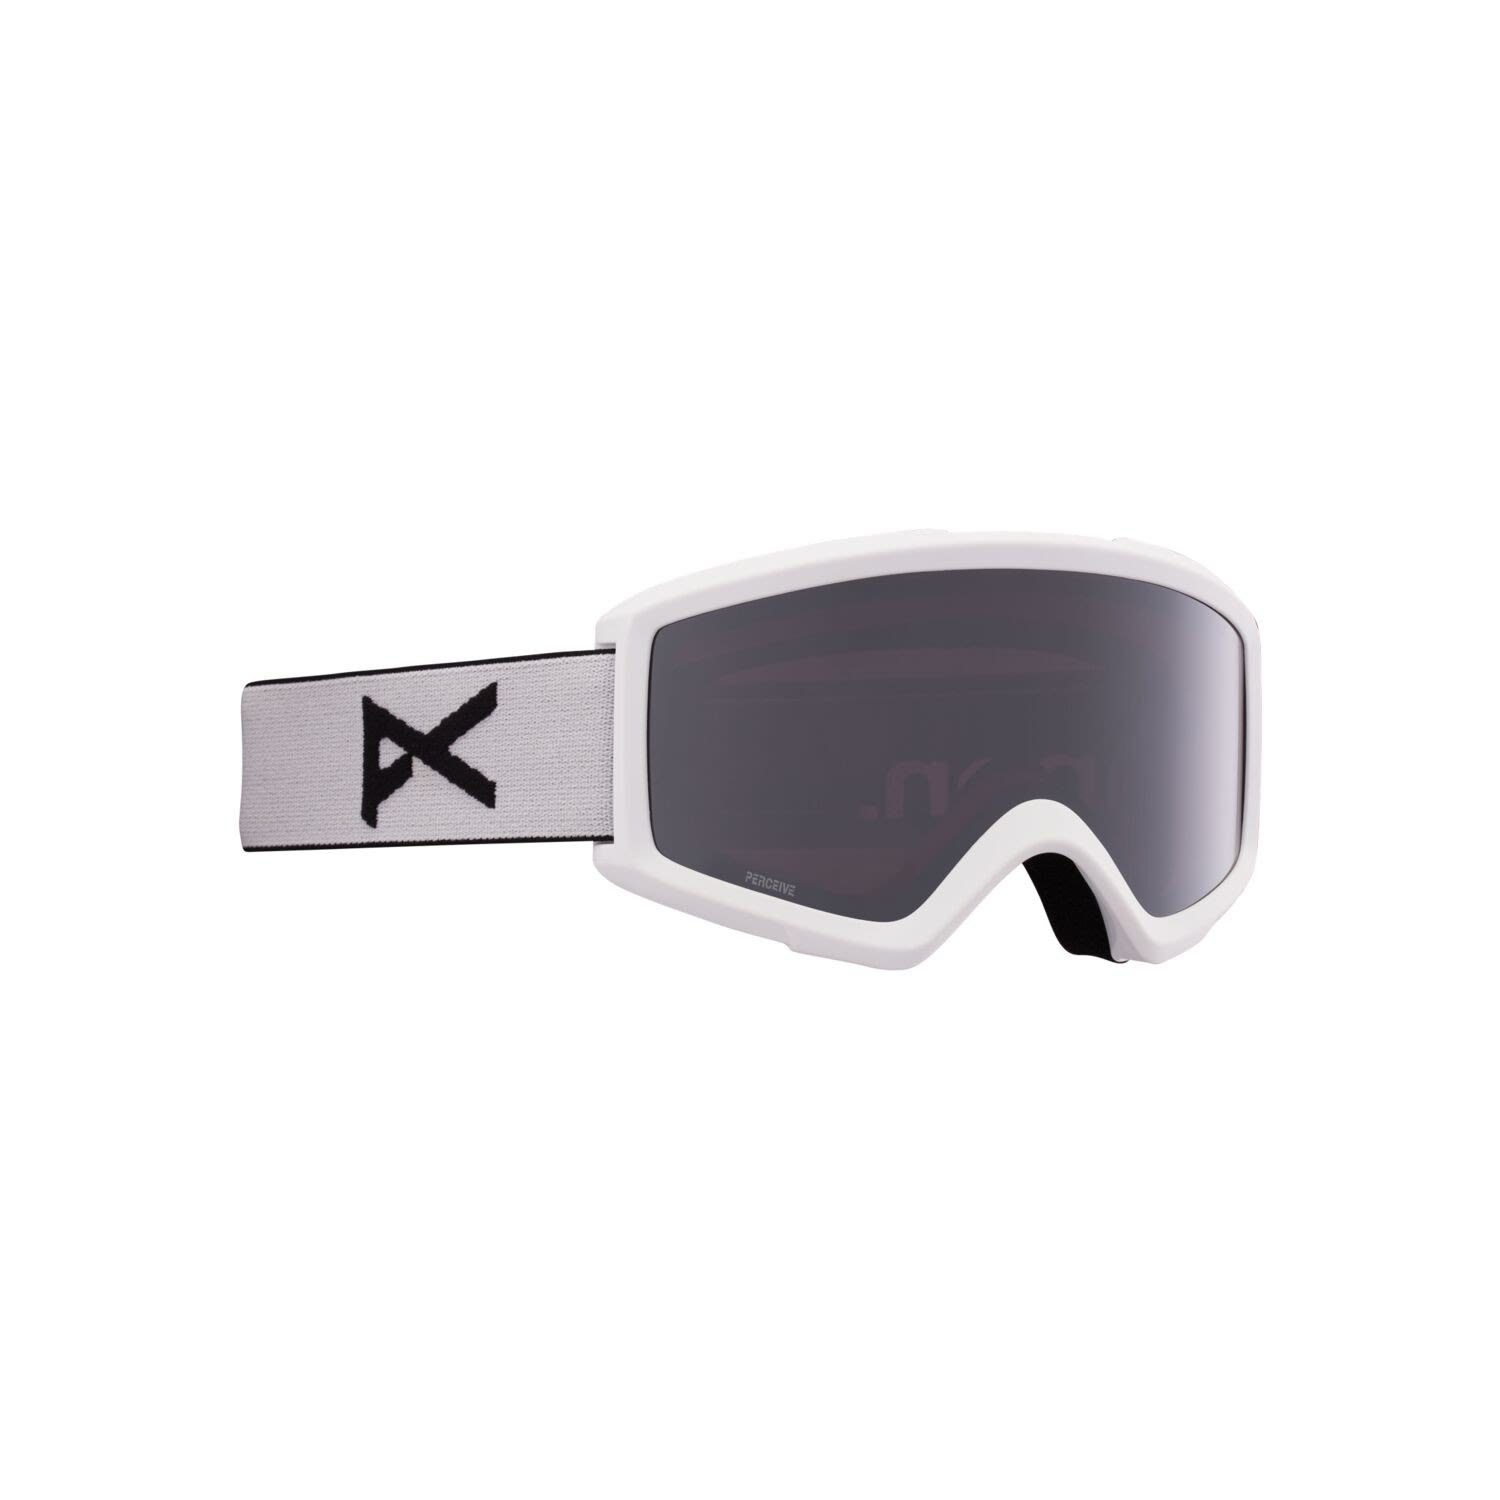 Anon Skibrille Anon - Lens 2.0 Spare White Helix Sunny Onyx Perceive With - Perceive Amber